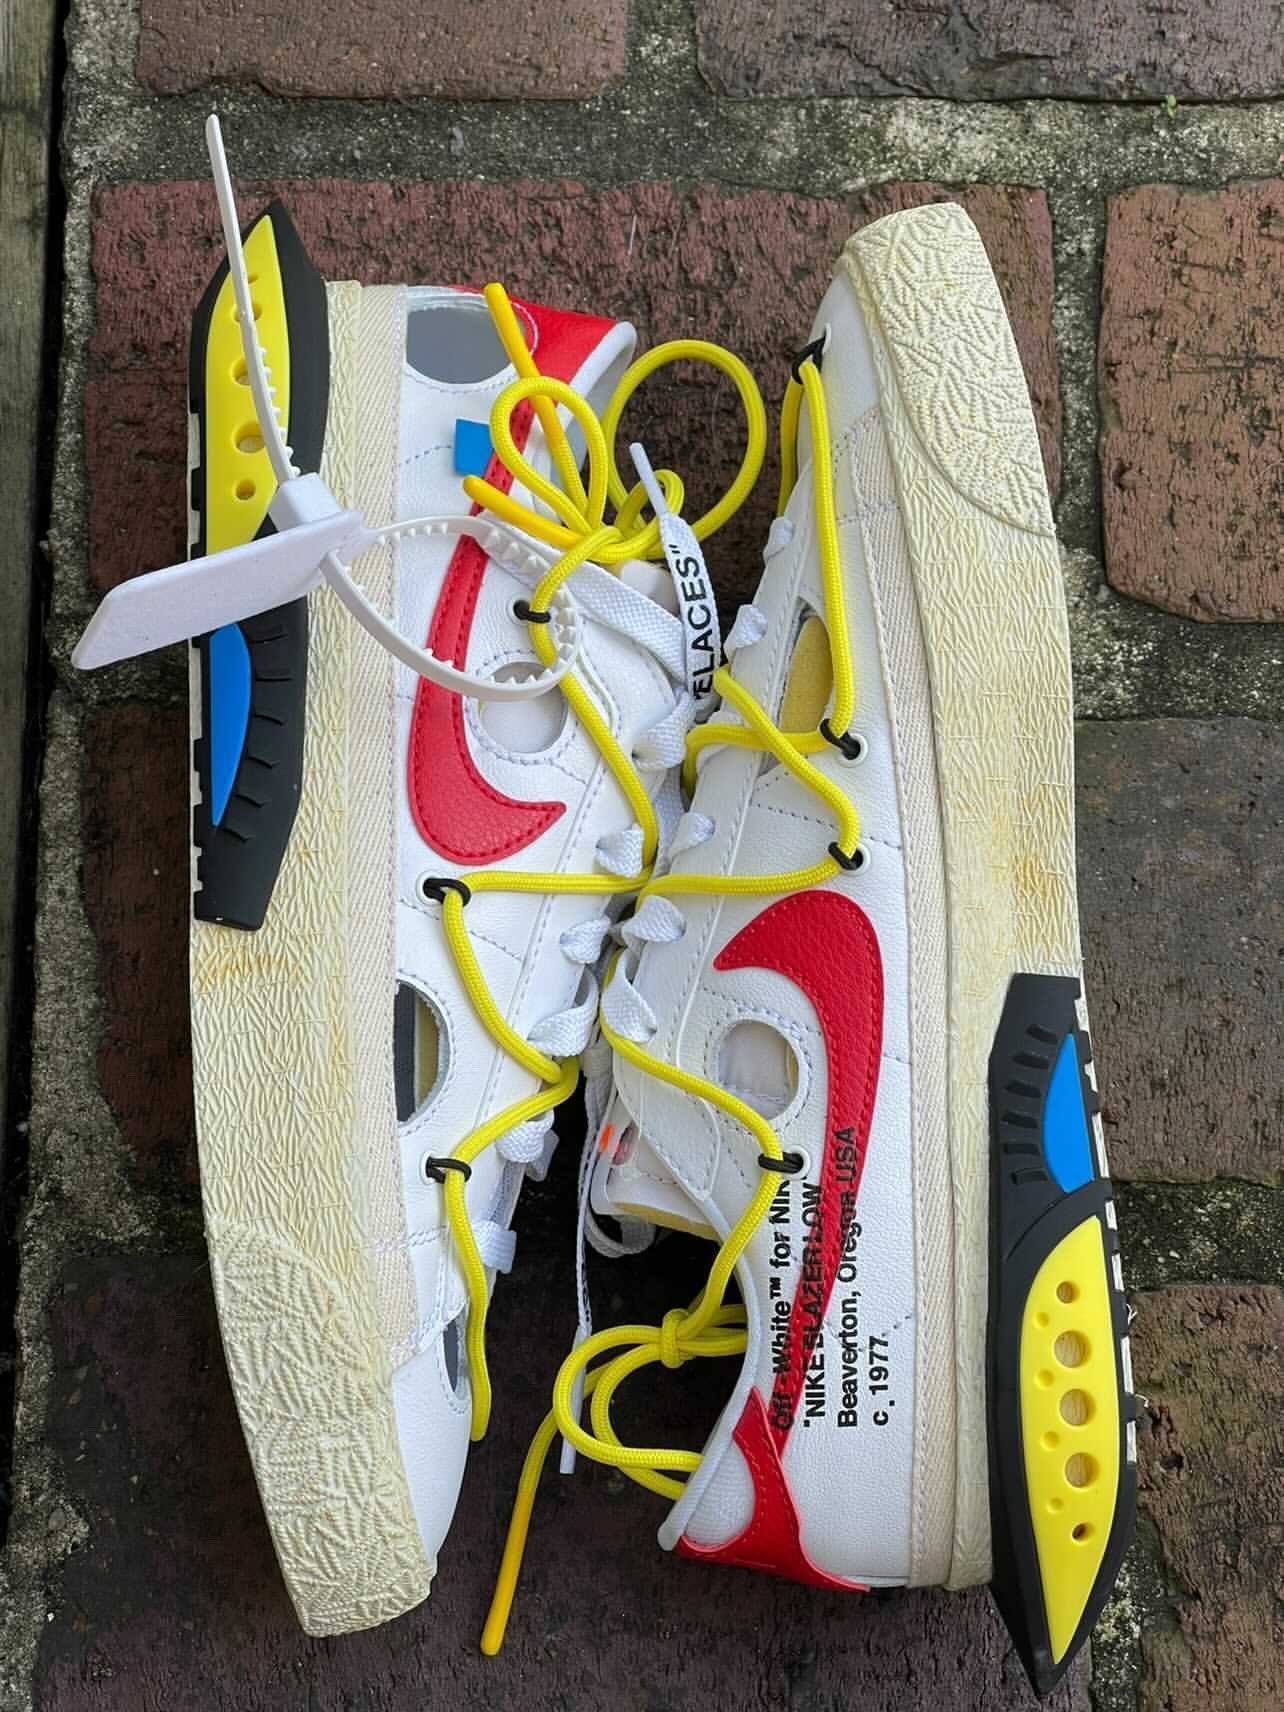 Off-White Nike Blazer Low 2022 DH7863-100 DH7863-001 Release Date 